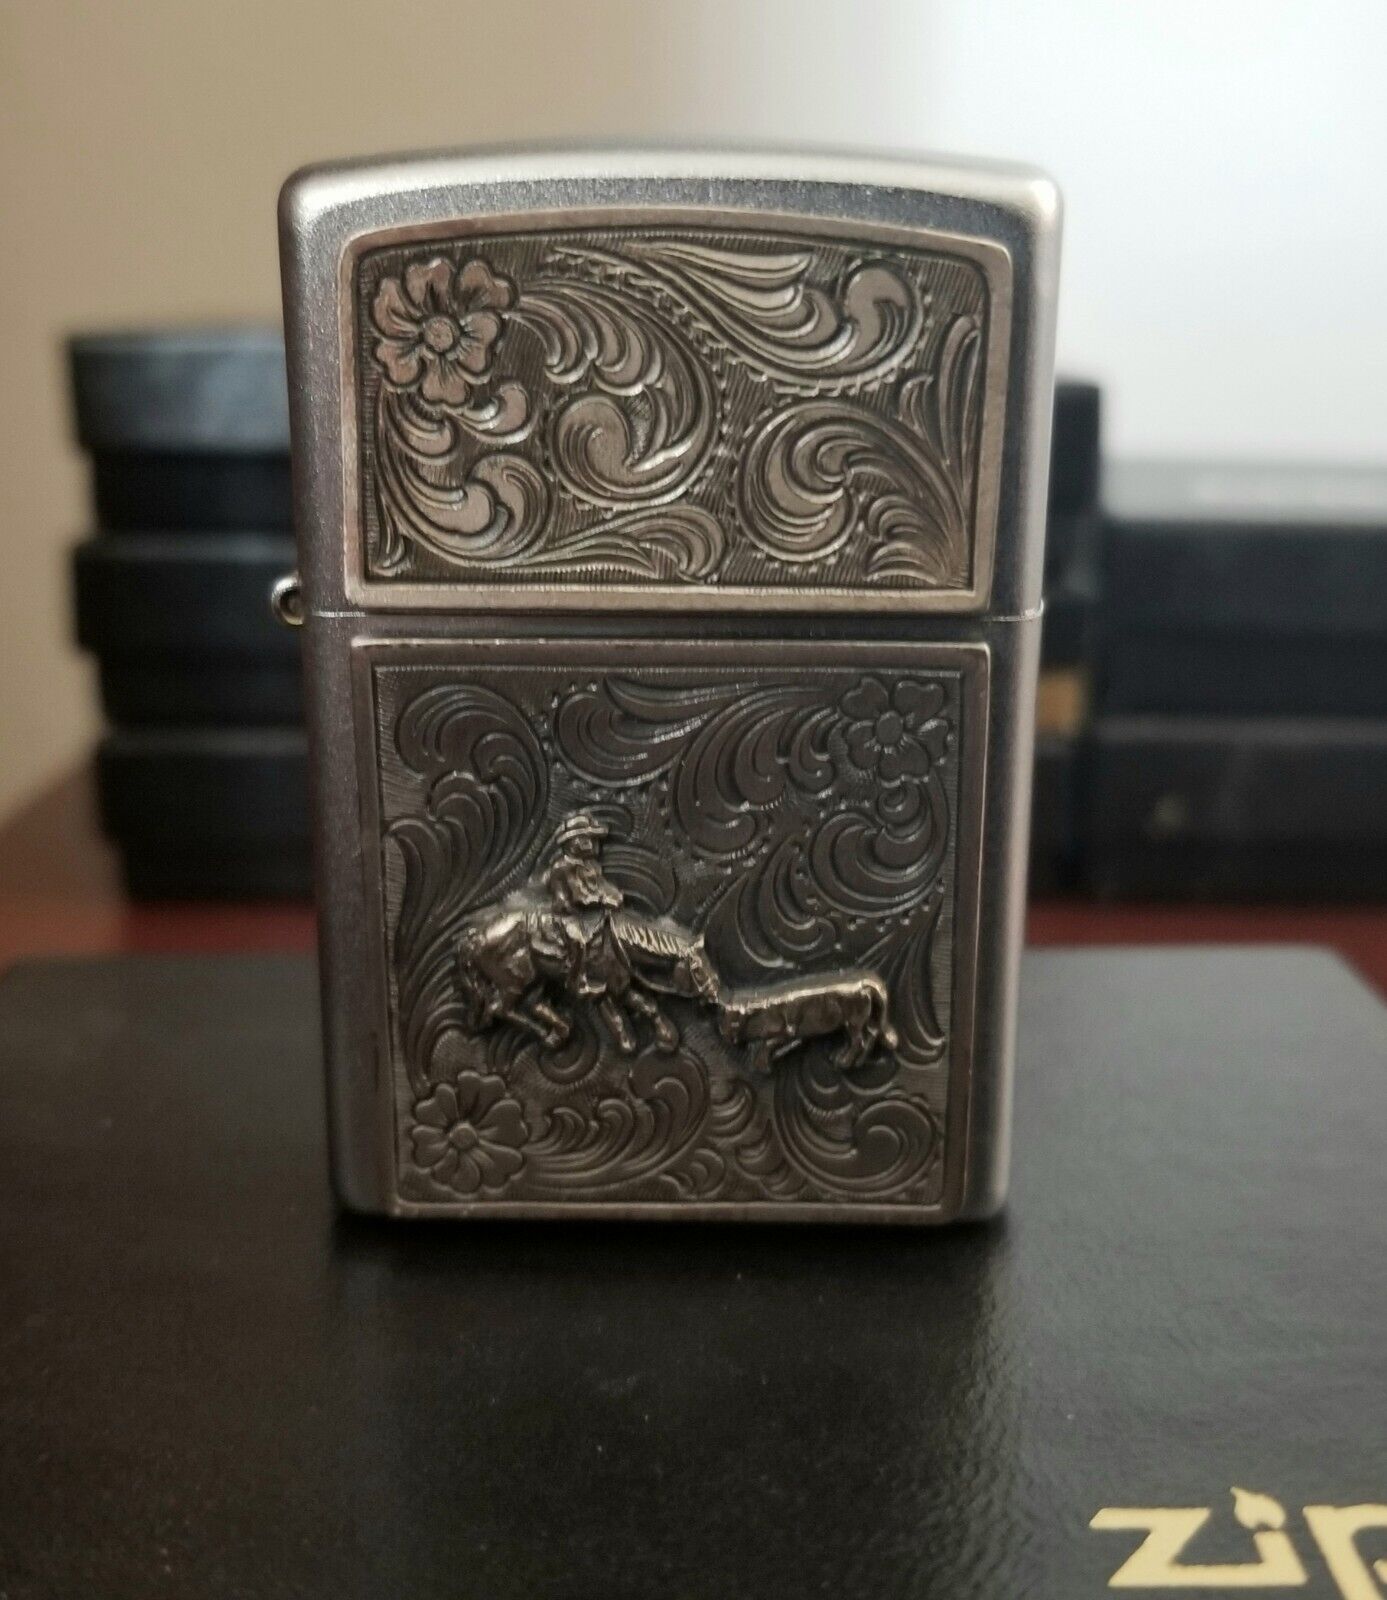 Super Rare, Zippo Lighter, Horse Rider Foal, Very Lightly Used, Only One on Ebay